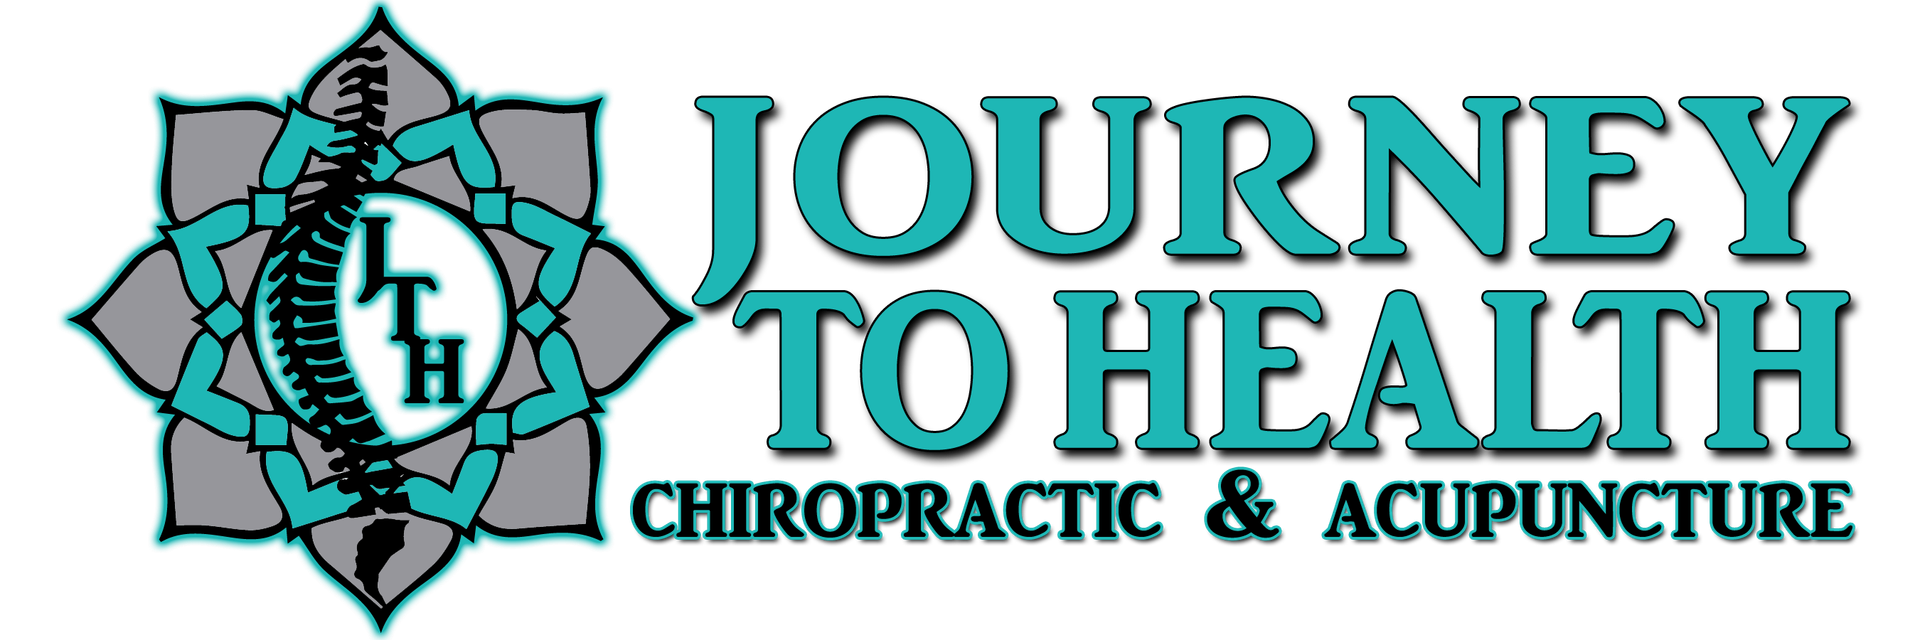 Journey to Health Chiropractic & Acupuncture